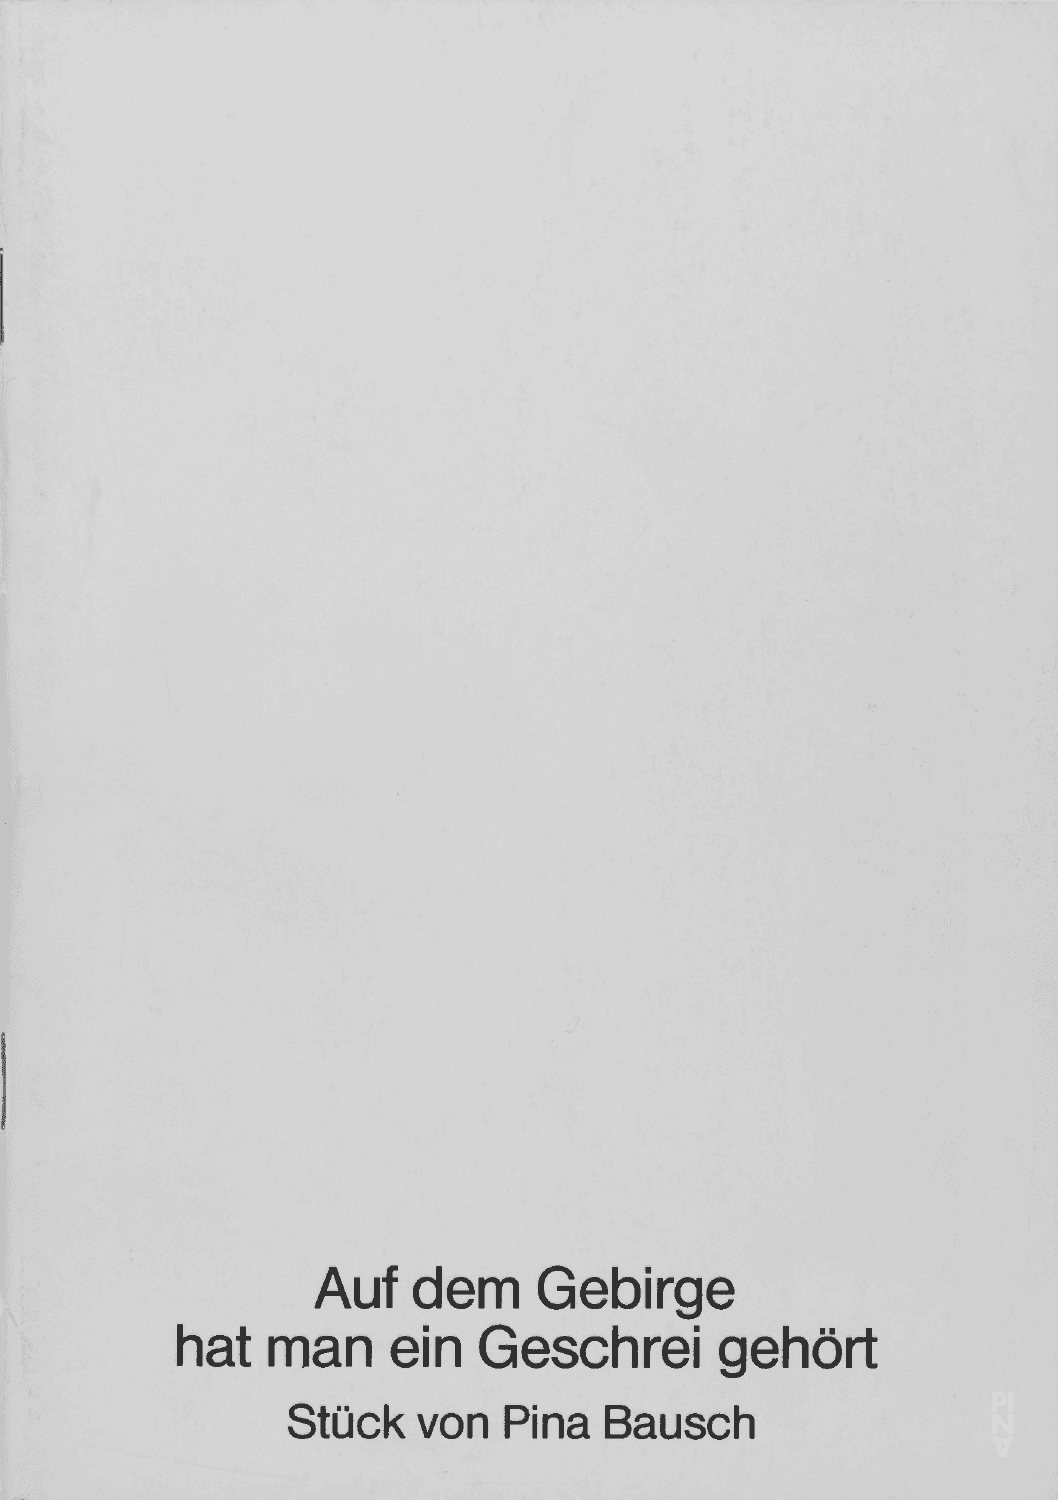 Booklet for “Auf dem Gebirge hat man ein Geschrei gehört (On the Mountain a Cry Was Heard)” by Pina Bausch with Tanztheater Wuppertal in in Wuppertal, May 13, 1984